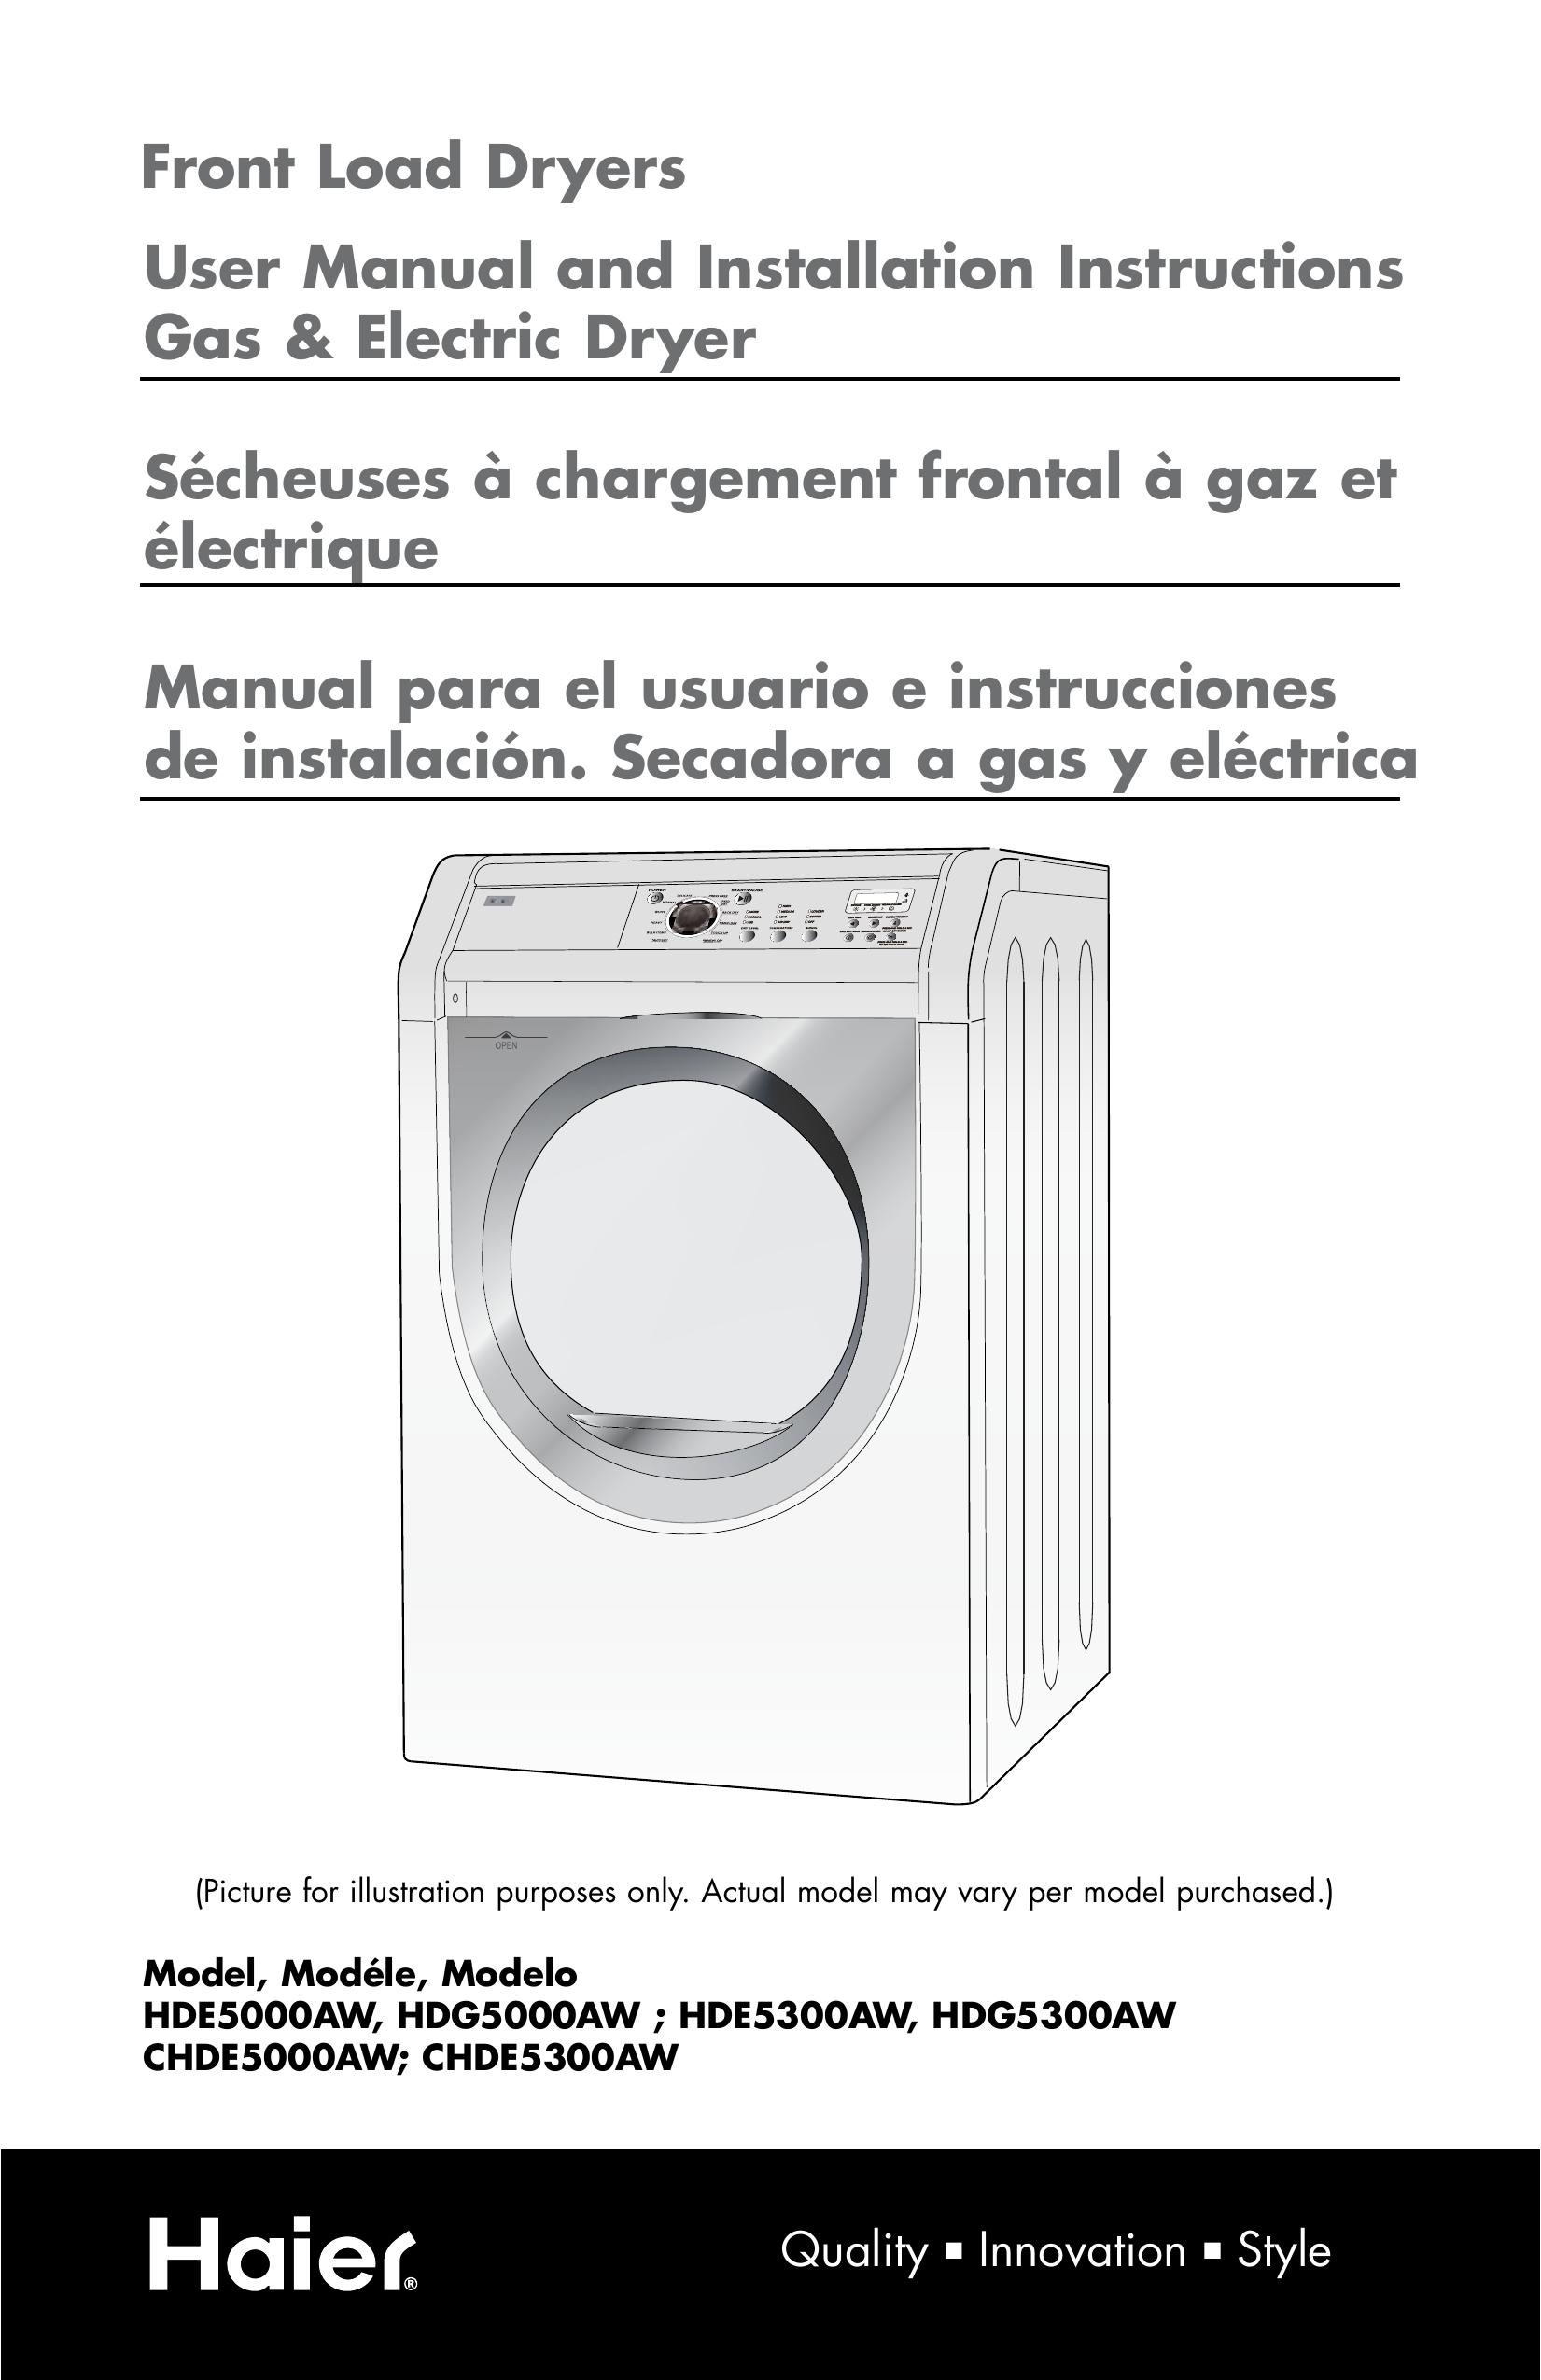 Haier CHDE5000AW Clothes Dryer User Manual